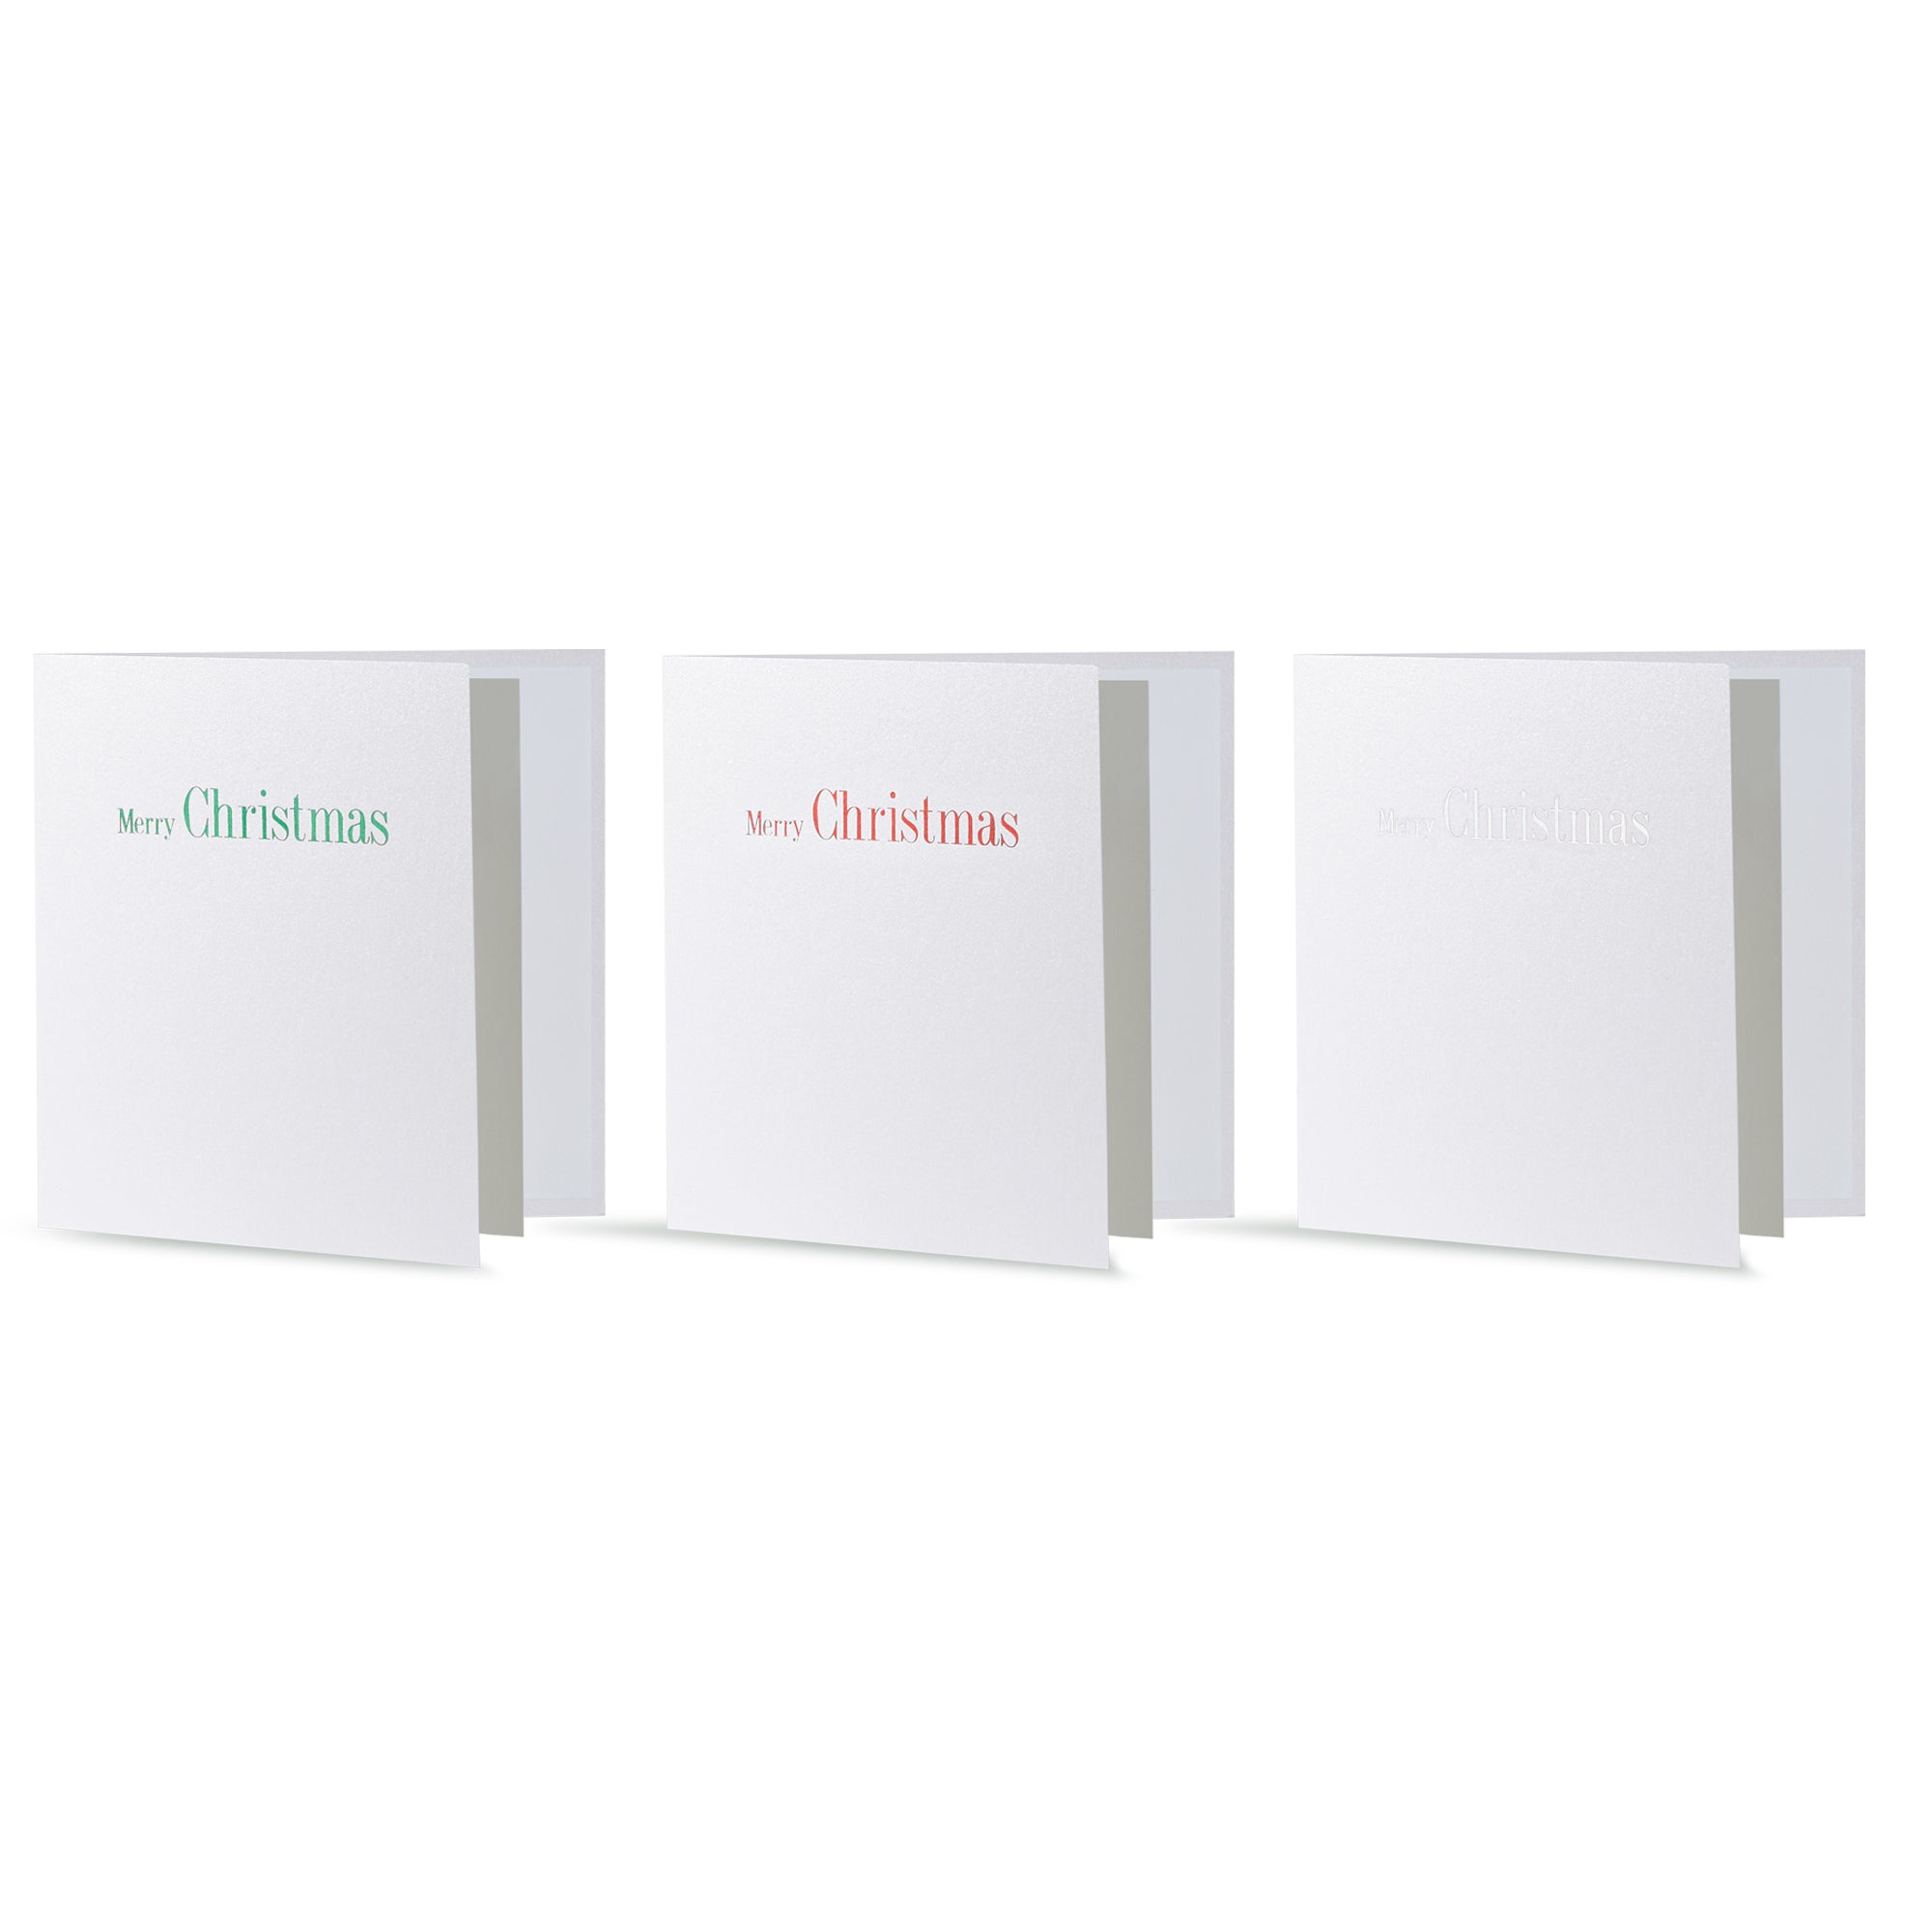 Merry Christmas, Multi Foiled Mini Cards, Sets of 9